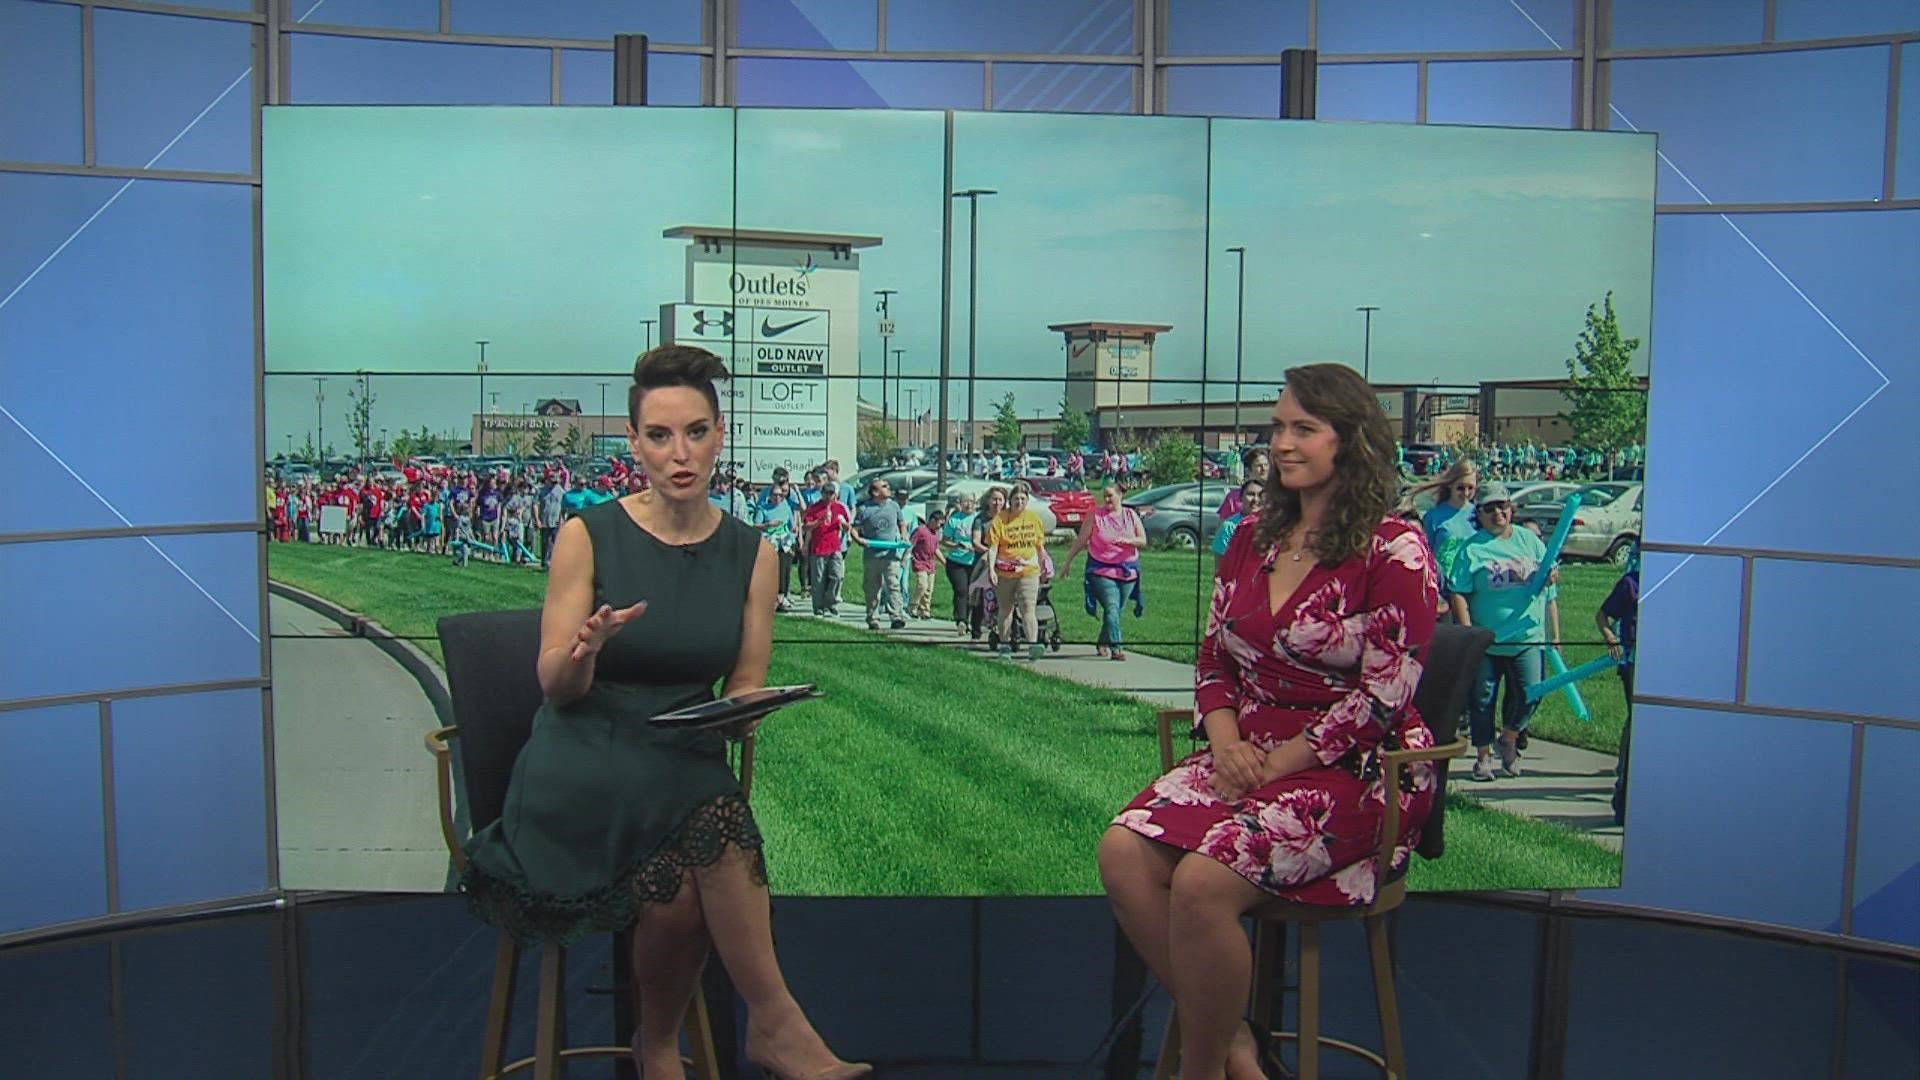 CFF's Kelsey White explains how to get involved in their walk for cystic fibrosis awareness this weekend.